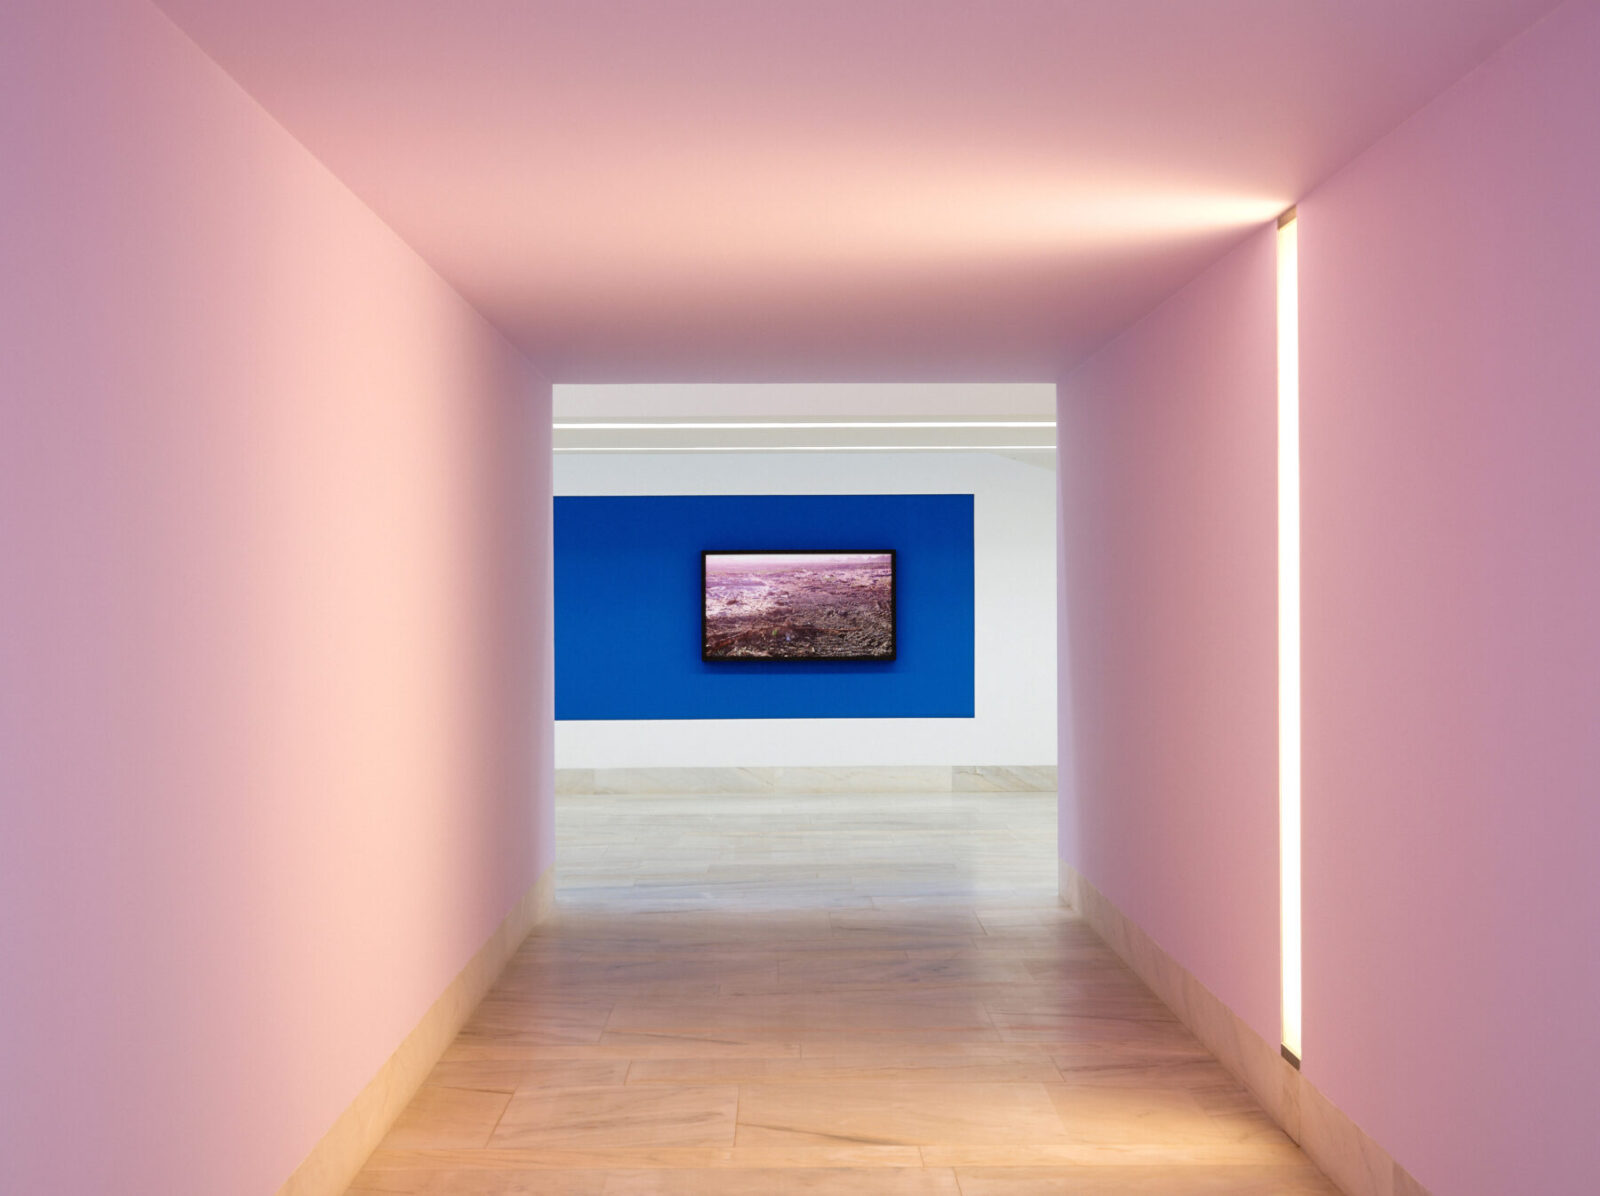 Archisearch BUREAU colourfully designed the world of 'Distant Lights' - Nuno Cera's solo exhibition in Sines Arts Centre, Portugal